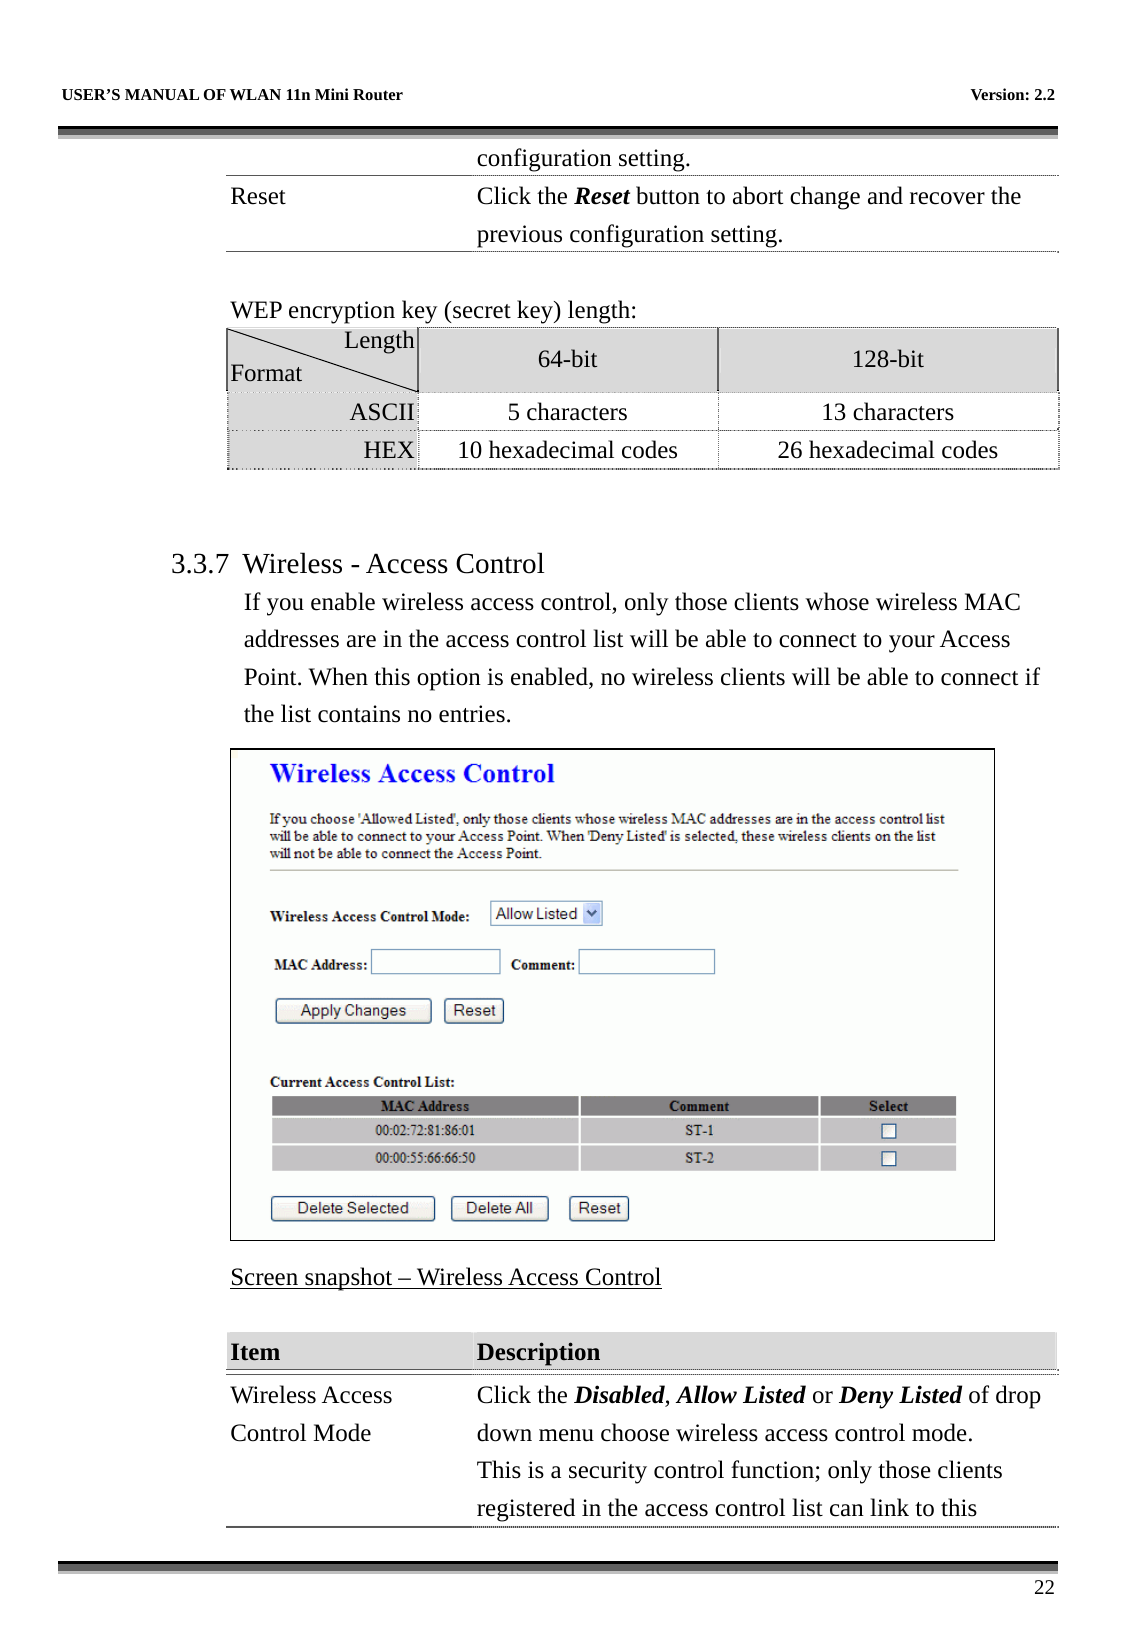   USER’S MANUAL OF WLAN 11n Mini Router    Version: 2.2      22 configuration setting. Reset Click the Reset button to abort change and recover the previous configuration setting.  WEP encryption key (secret key) length: Length Format  64-bit  128-bit ASCII  5 characters  13 characters HEX  10 hexadecimal codes    26 hexadecimal codes   3.3.7  Wireless - Access Control If you enable wireless access control, only those clients whose wireless MAC addresses are in the access control list will be able to connect to your Access Point. When this option is enabled, no wireless clients will be able to connect if the list contains no entries.  Screen snapshot – Wireless Access Control  Item  Description   Wireless Access Control Mode Click the Disabled, Allow Listed or Deny Listed of drop down menu choose wireless access control mode. This is a security control function; only those clients registered in the access control list can link to this 